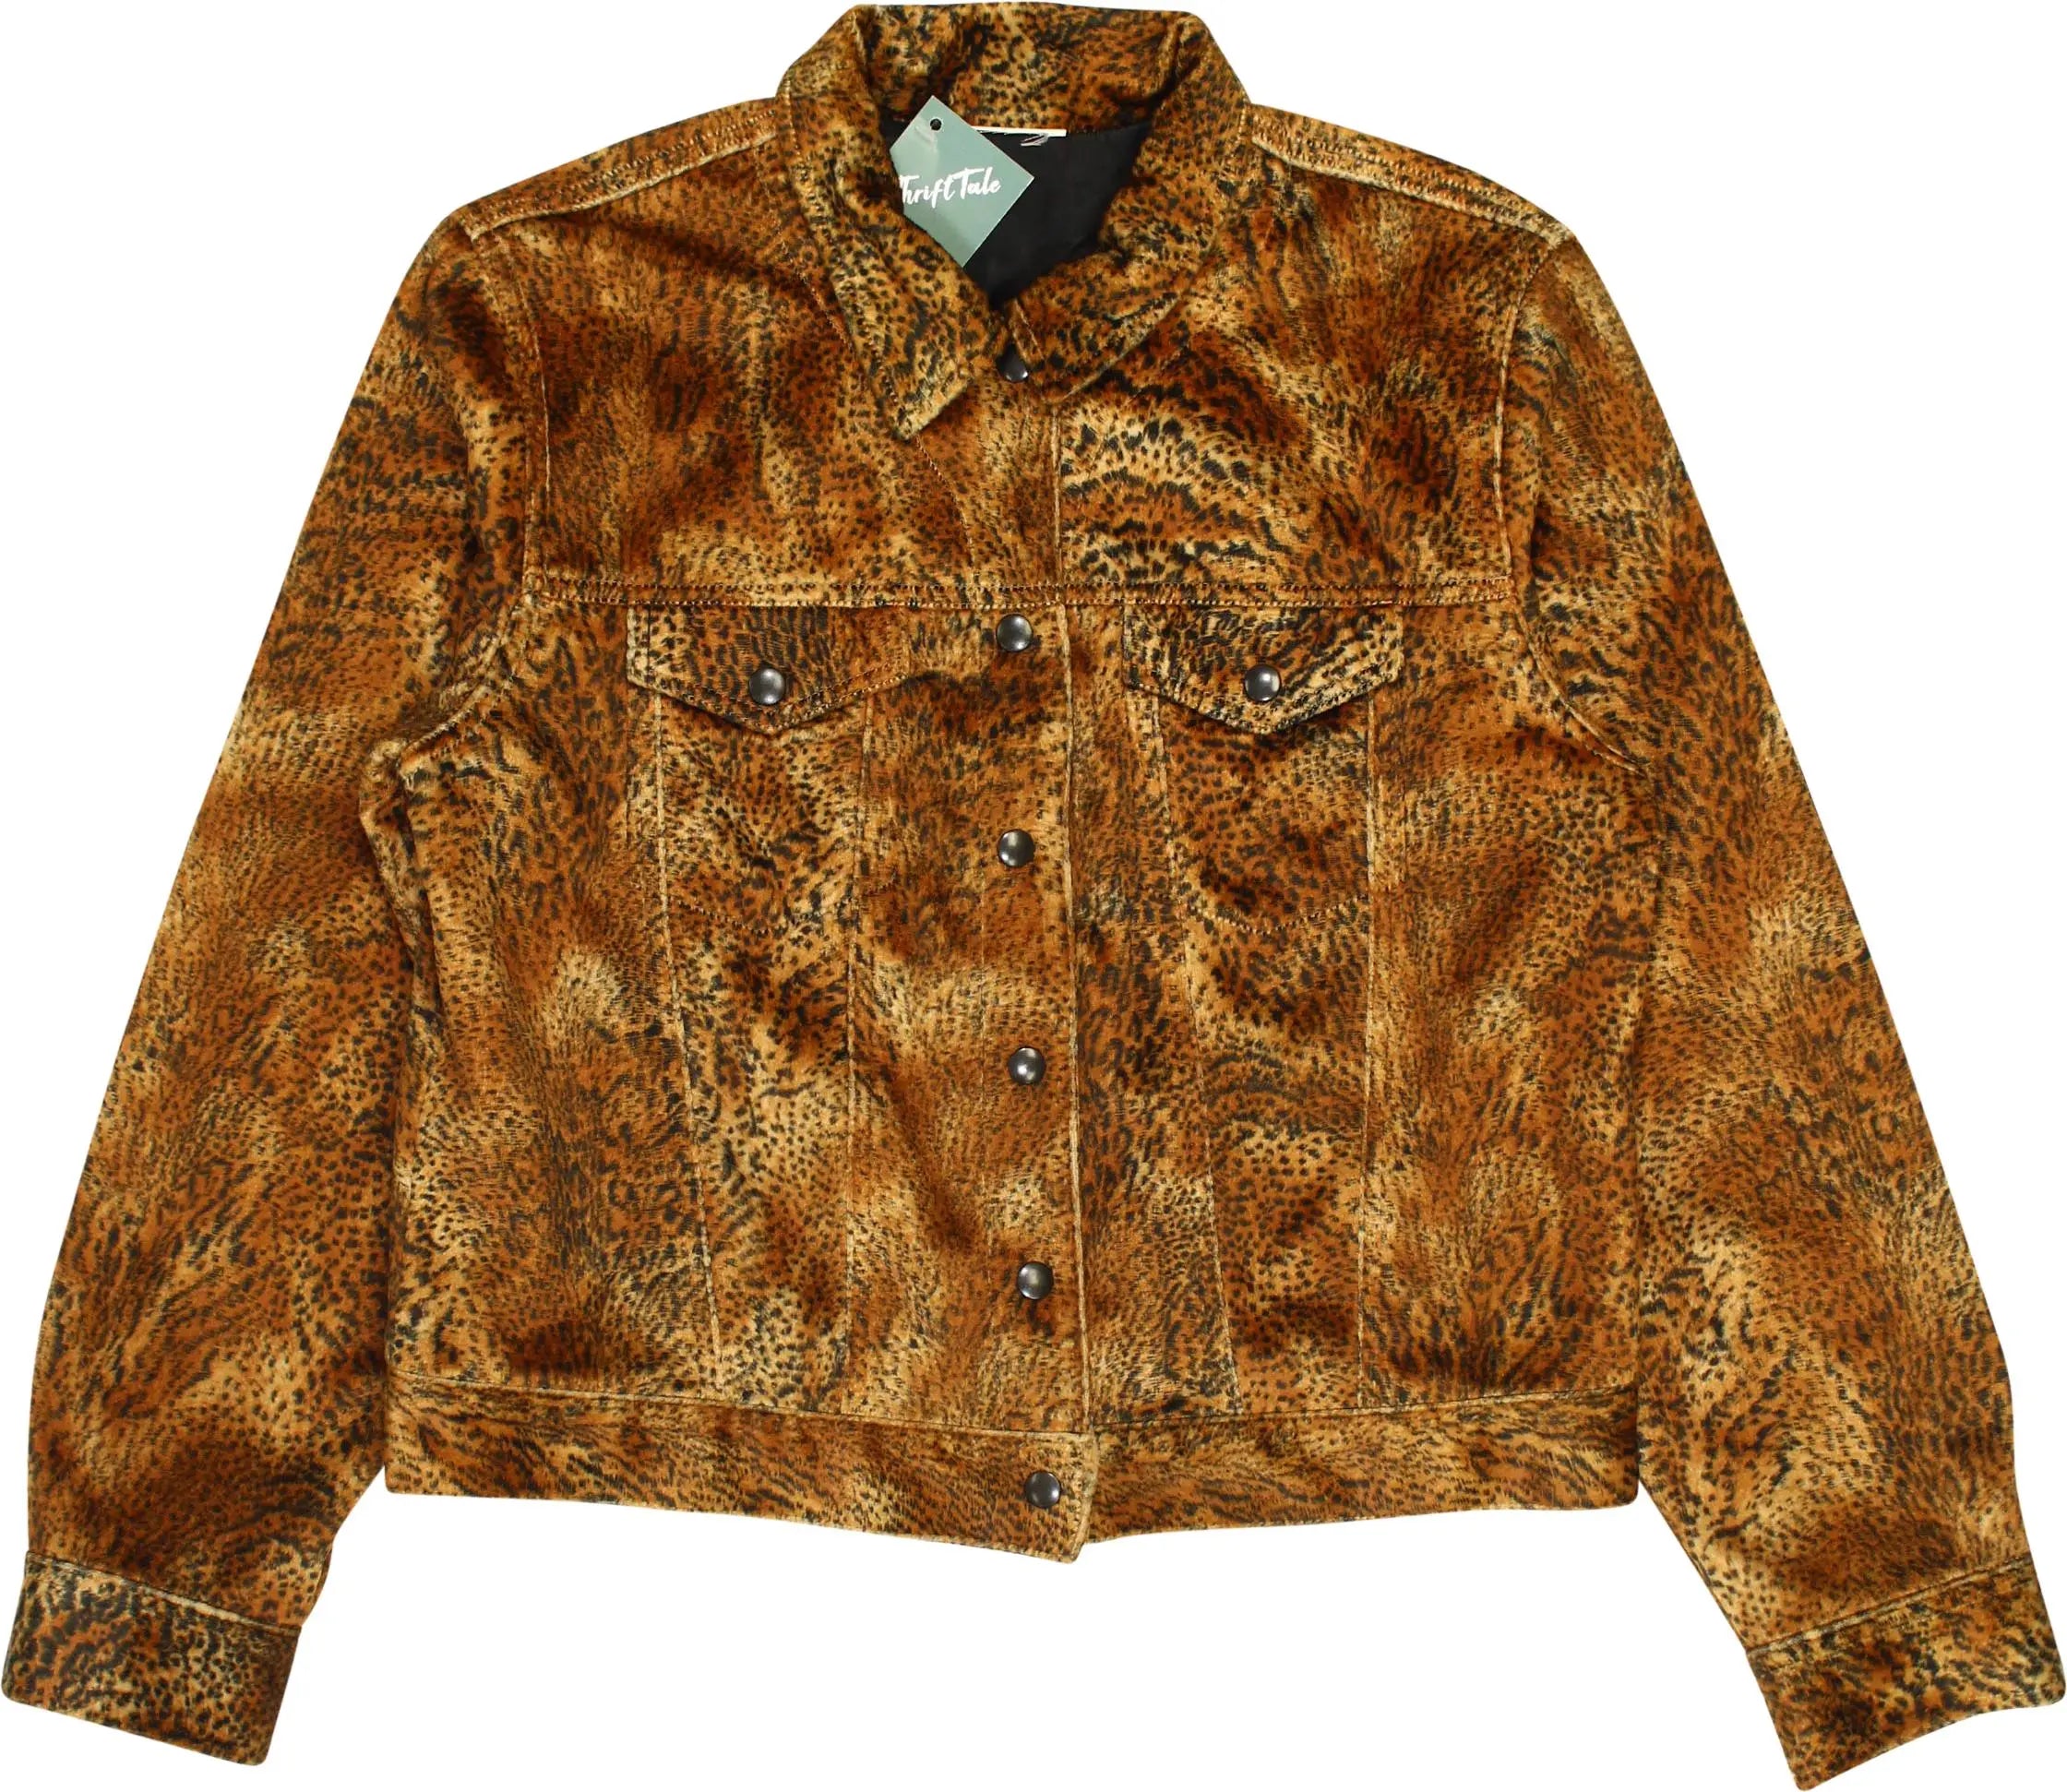 Unknown - Leopard Jacket- ThriftTale.com - Vintage and second handclothing